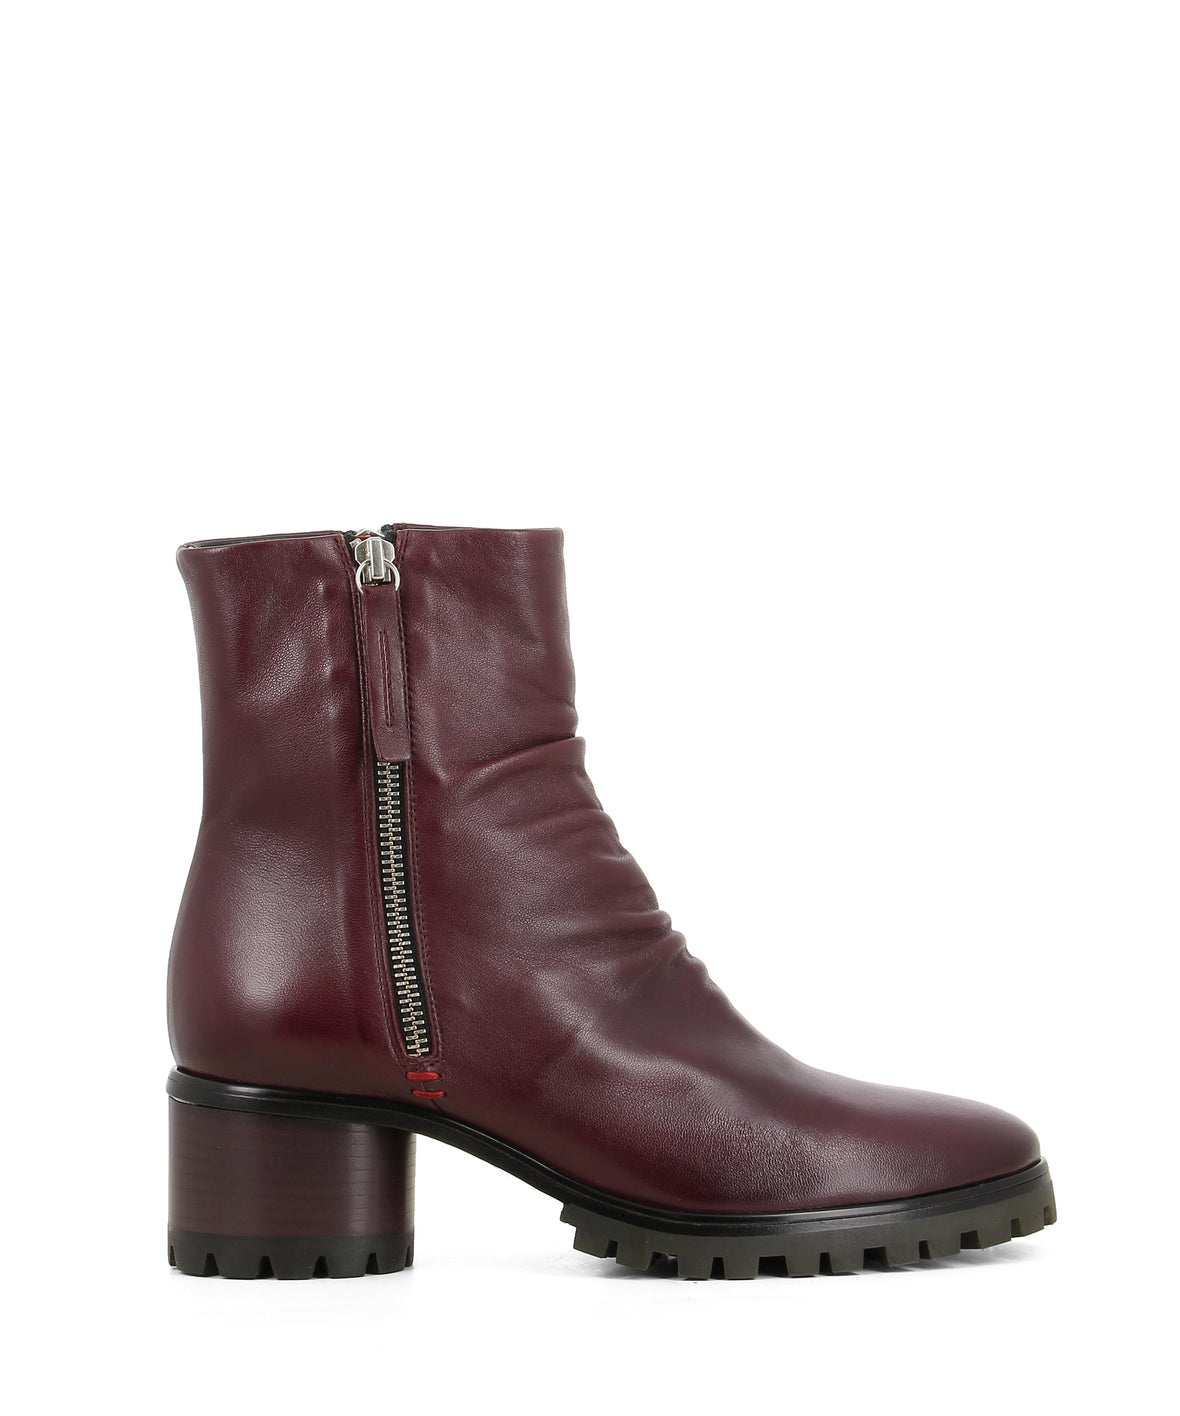 Mulberry Italian Leather Ankle Boots 